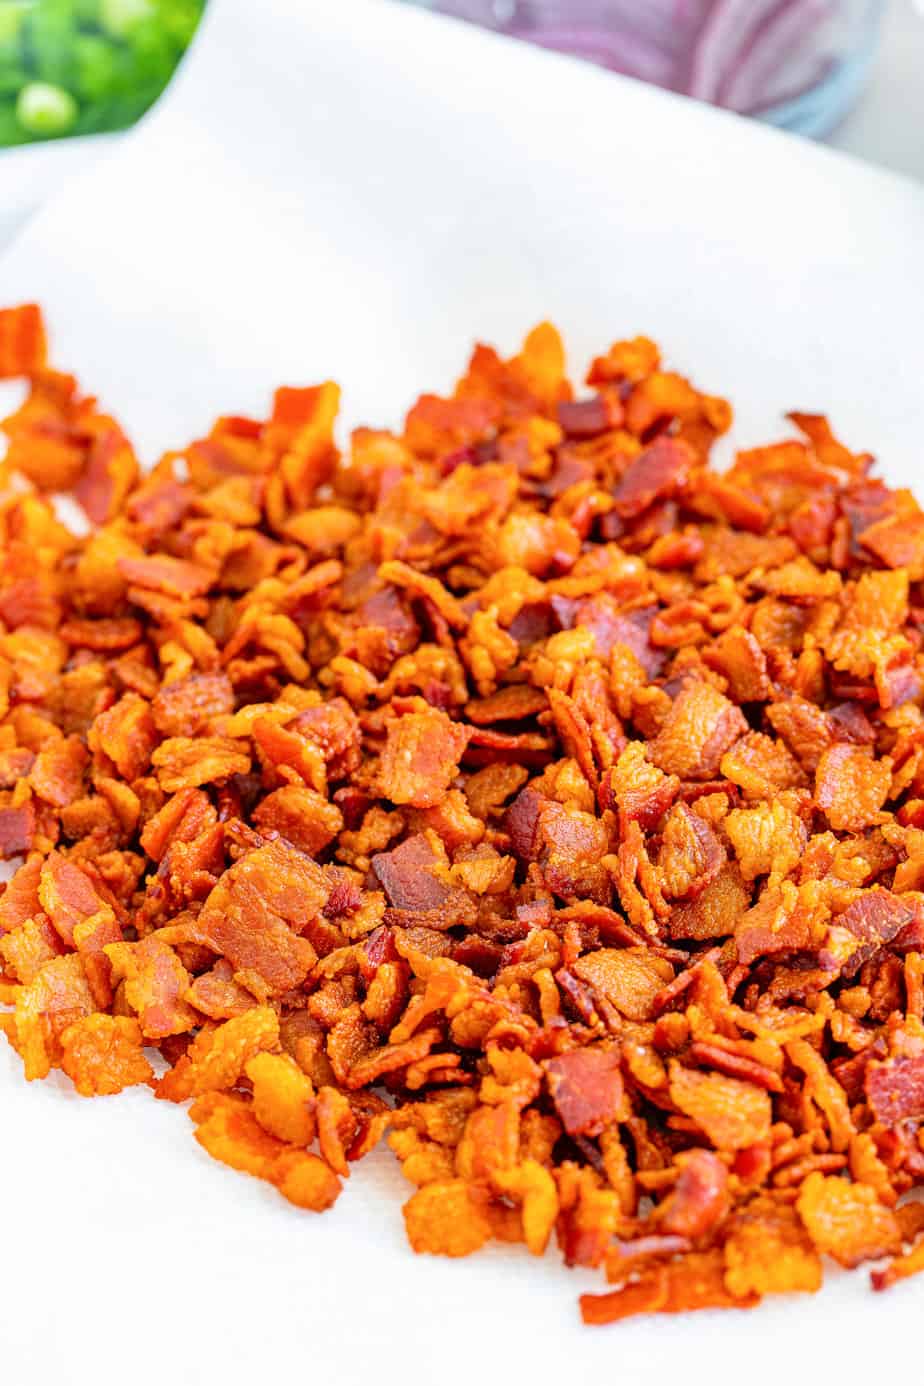 Crispy bacon chopped into small pieces draining on a paper towel from the side.